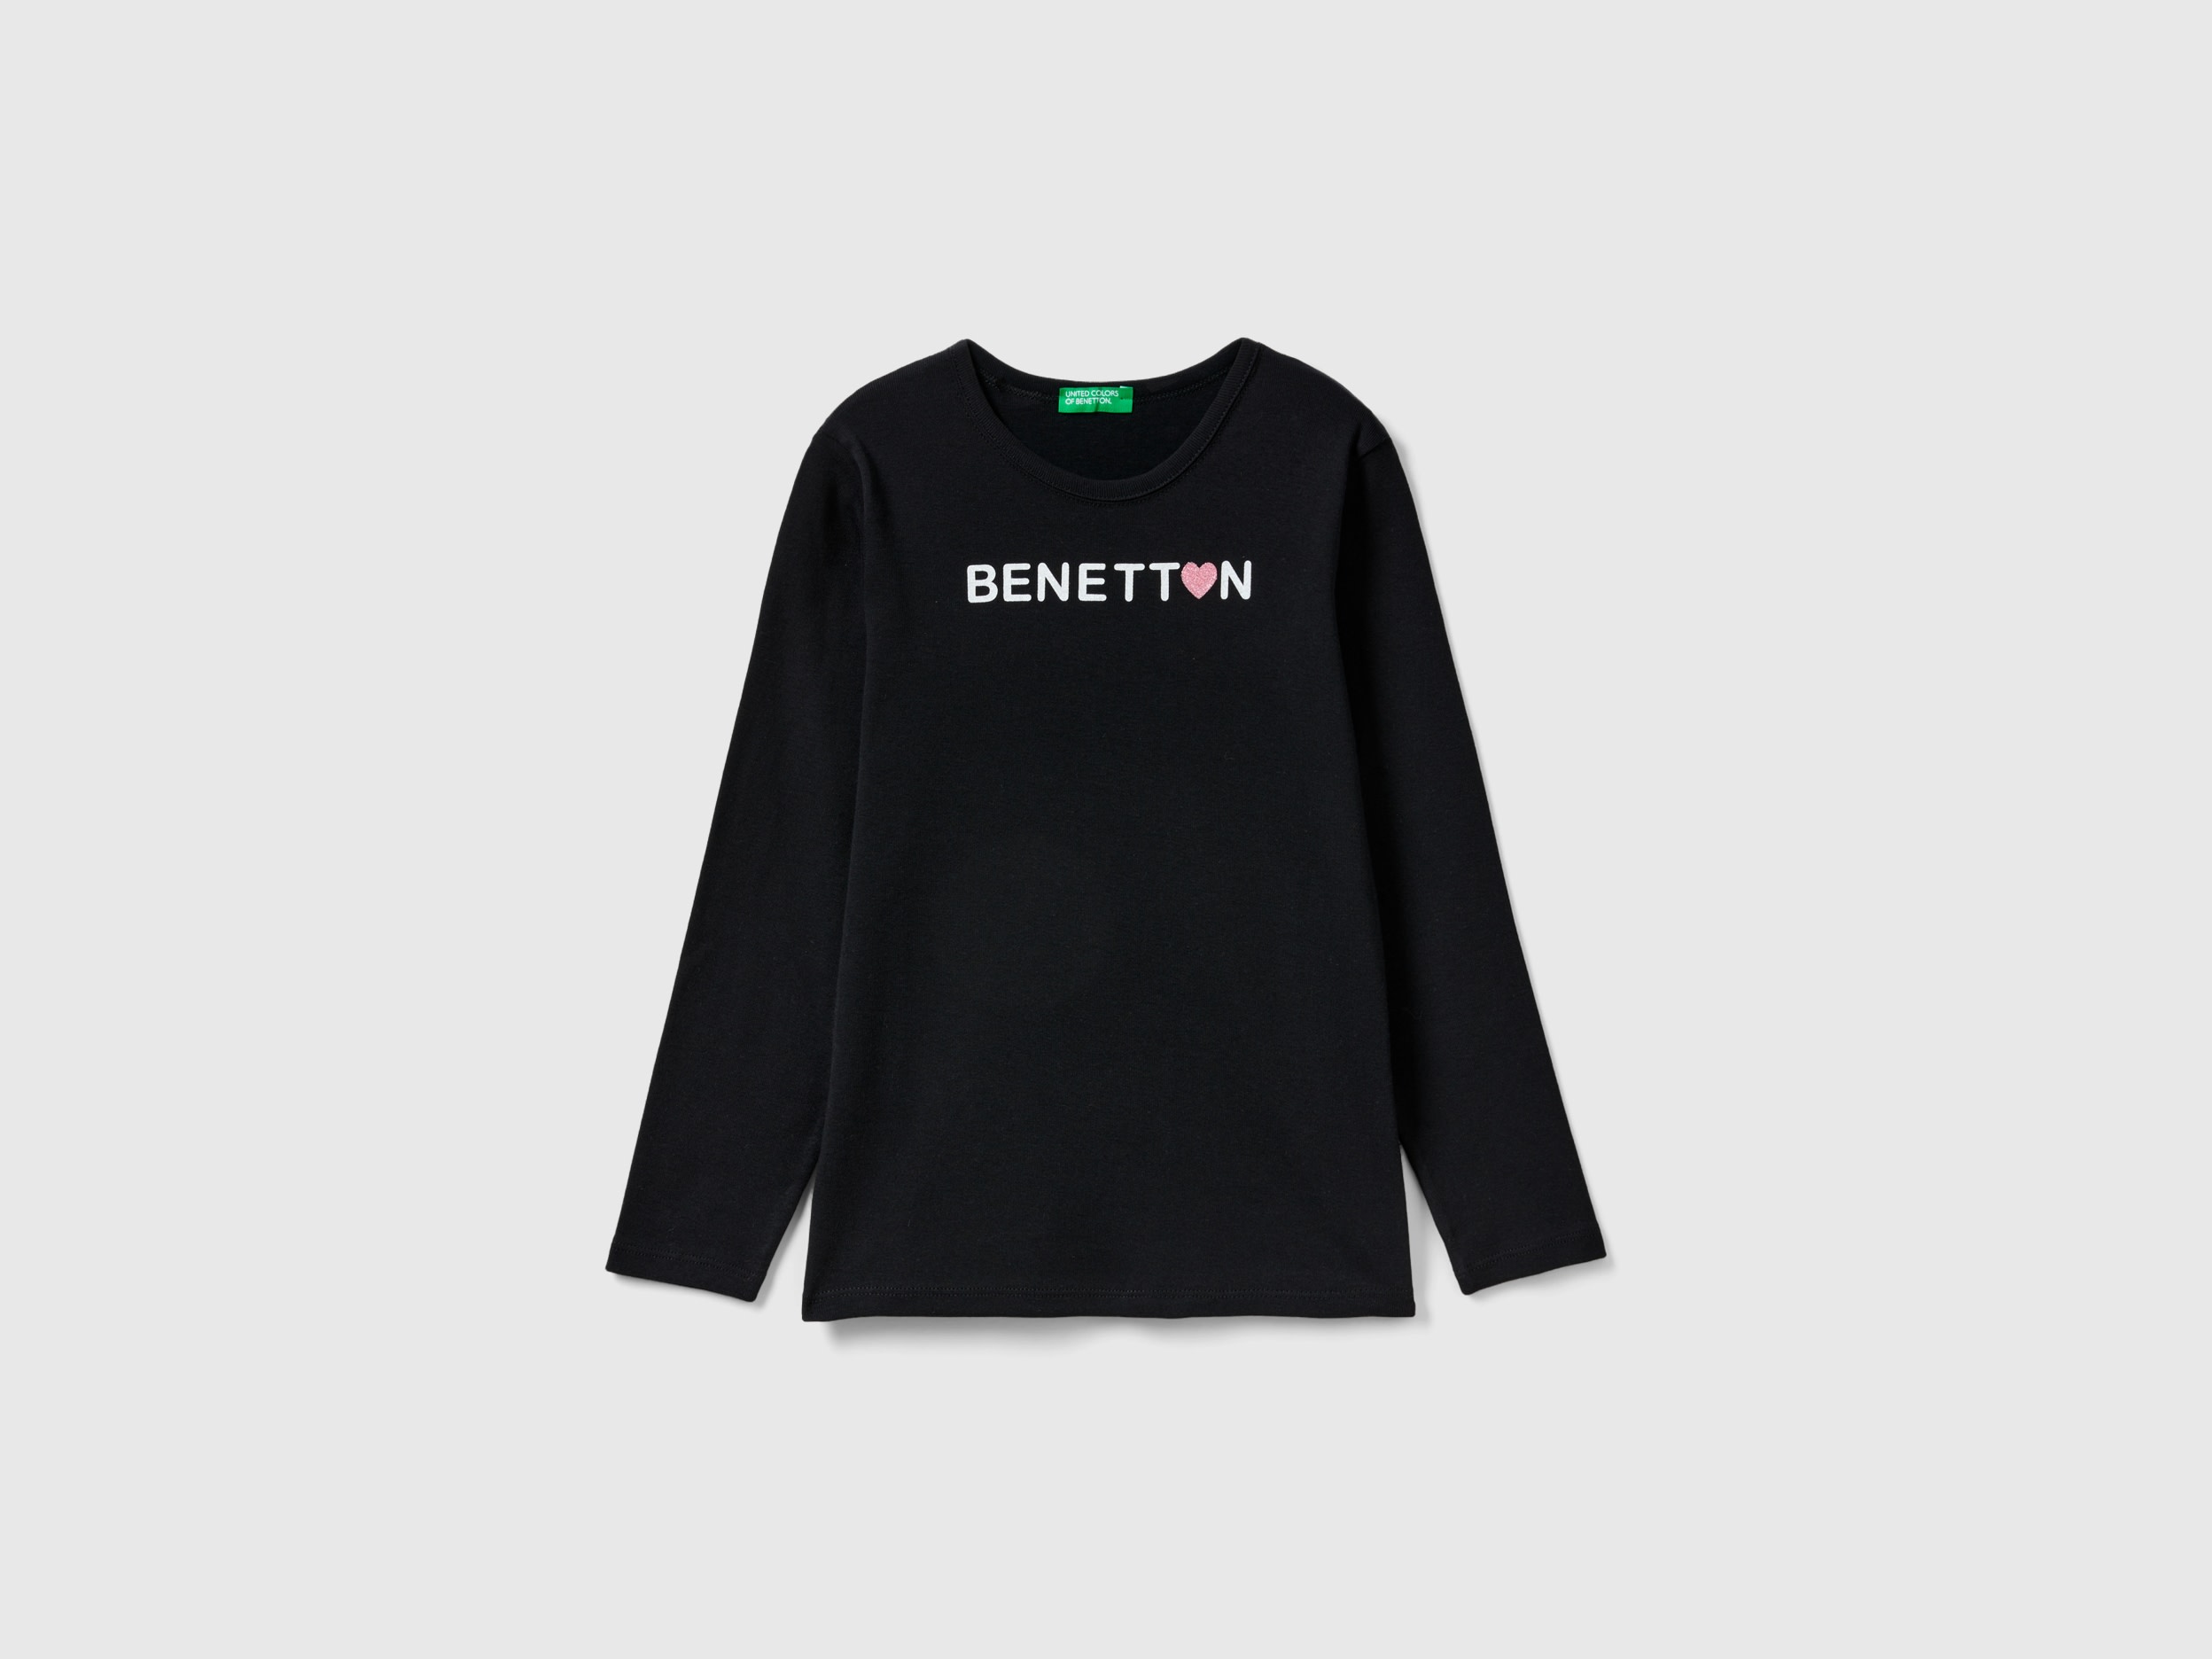 Image of Benetton, Long Sleeve T-shirt With Glitter Print, size M, Black, Kids